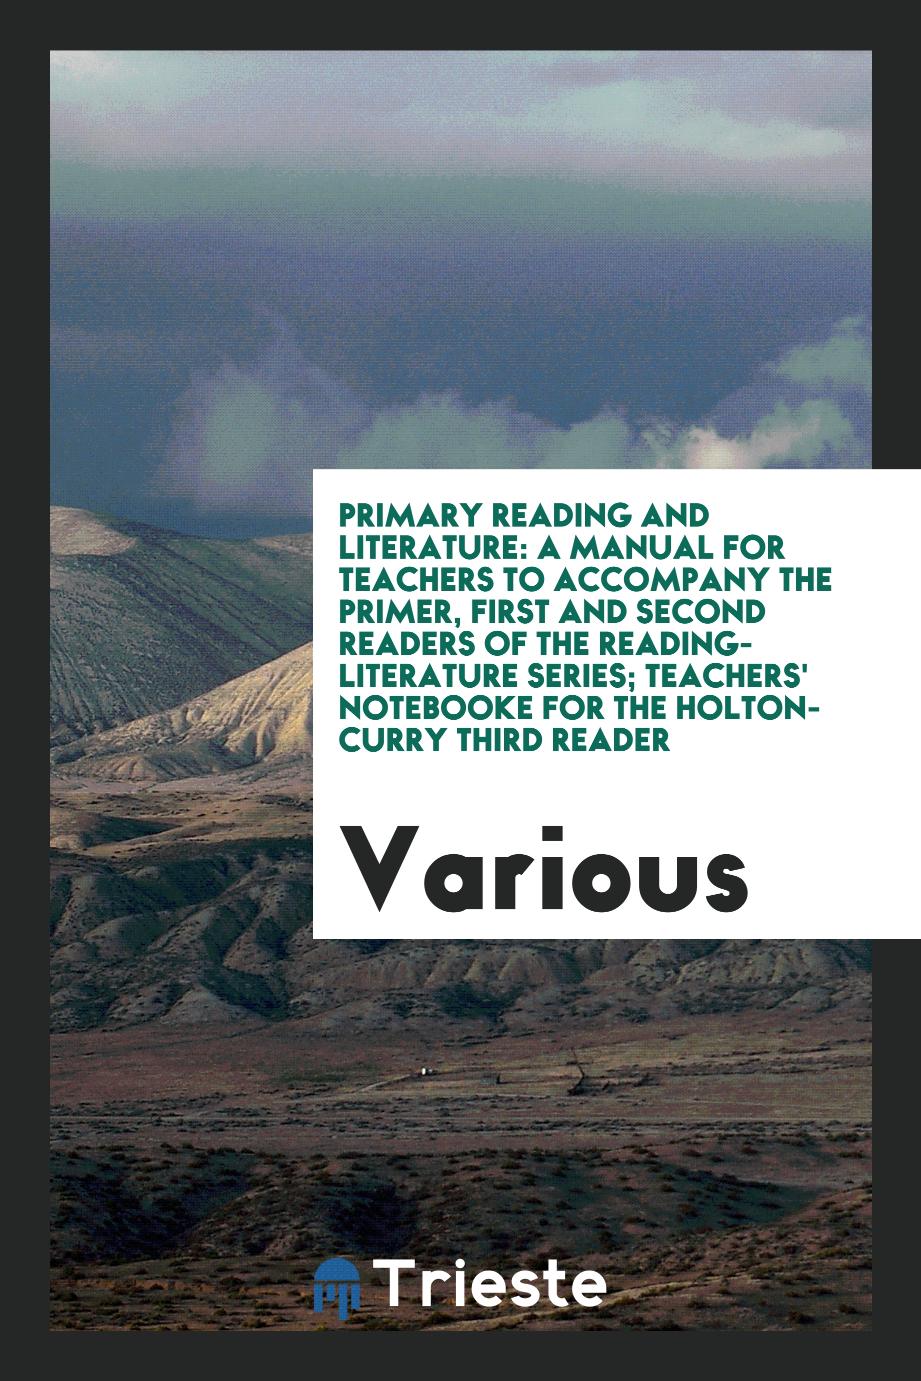 Primary reading and literature: a manual for teachers to accompany the primer, first and second readers of the reading-literature series; Teachers' notebooke for the Holton-Curry third reader